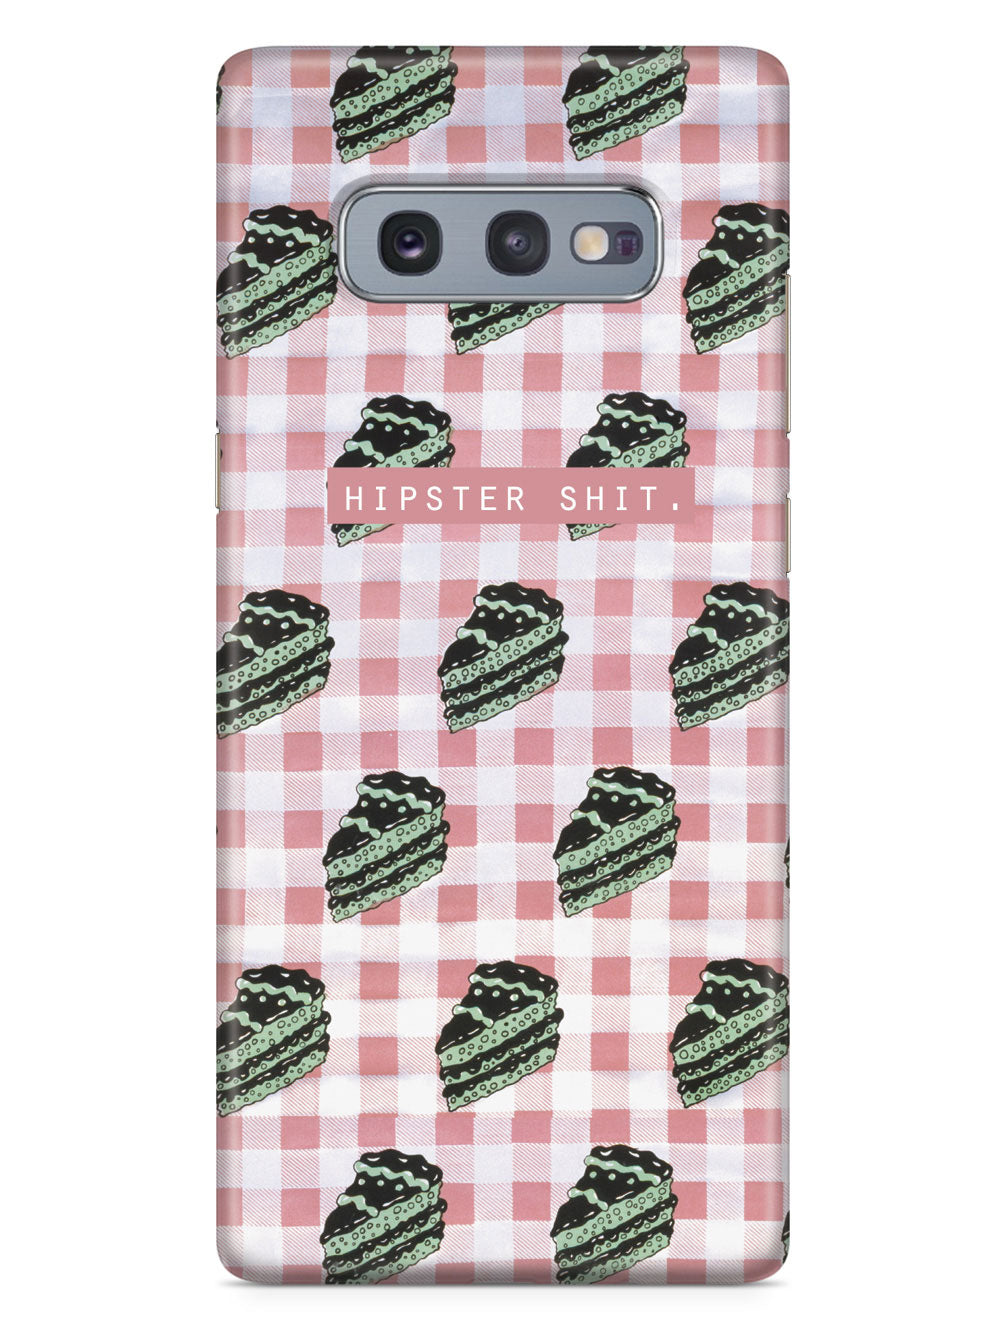 Hipster Shit Case